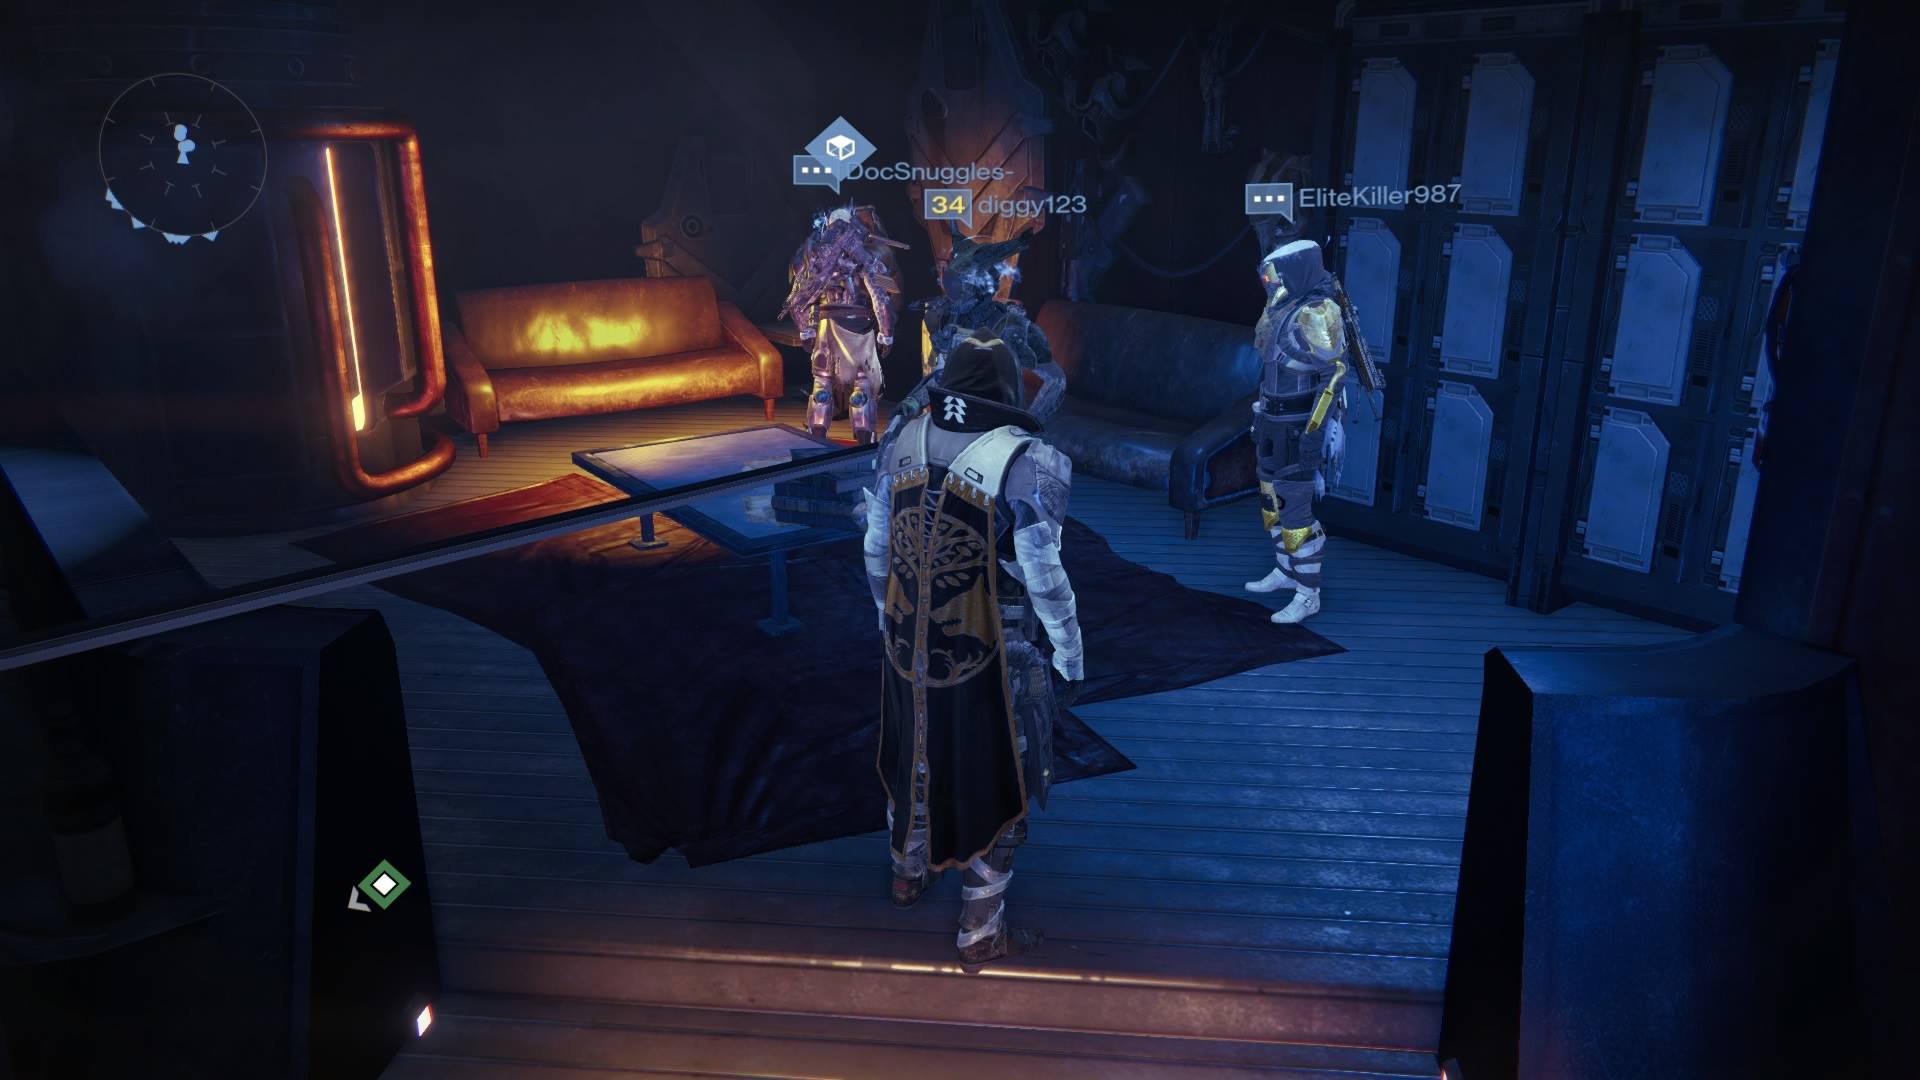 Xur – Agent of the Nine can be found in the Hunter's Lounge area, below the Hangar. 